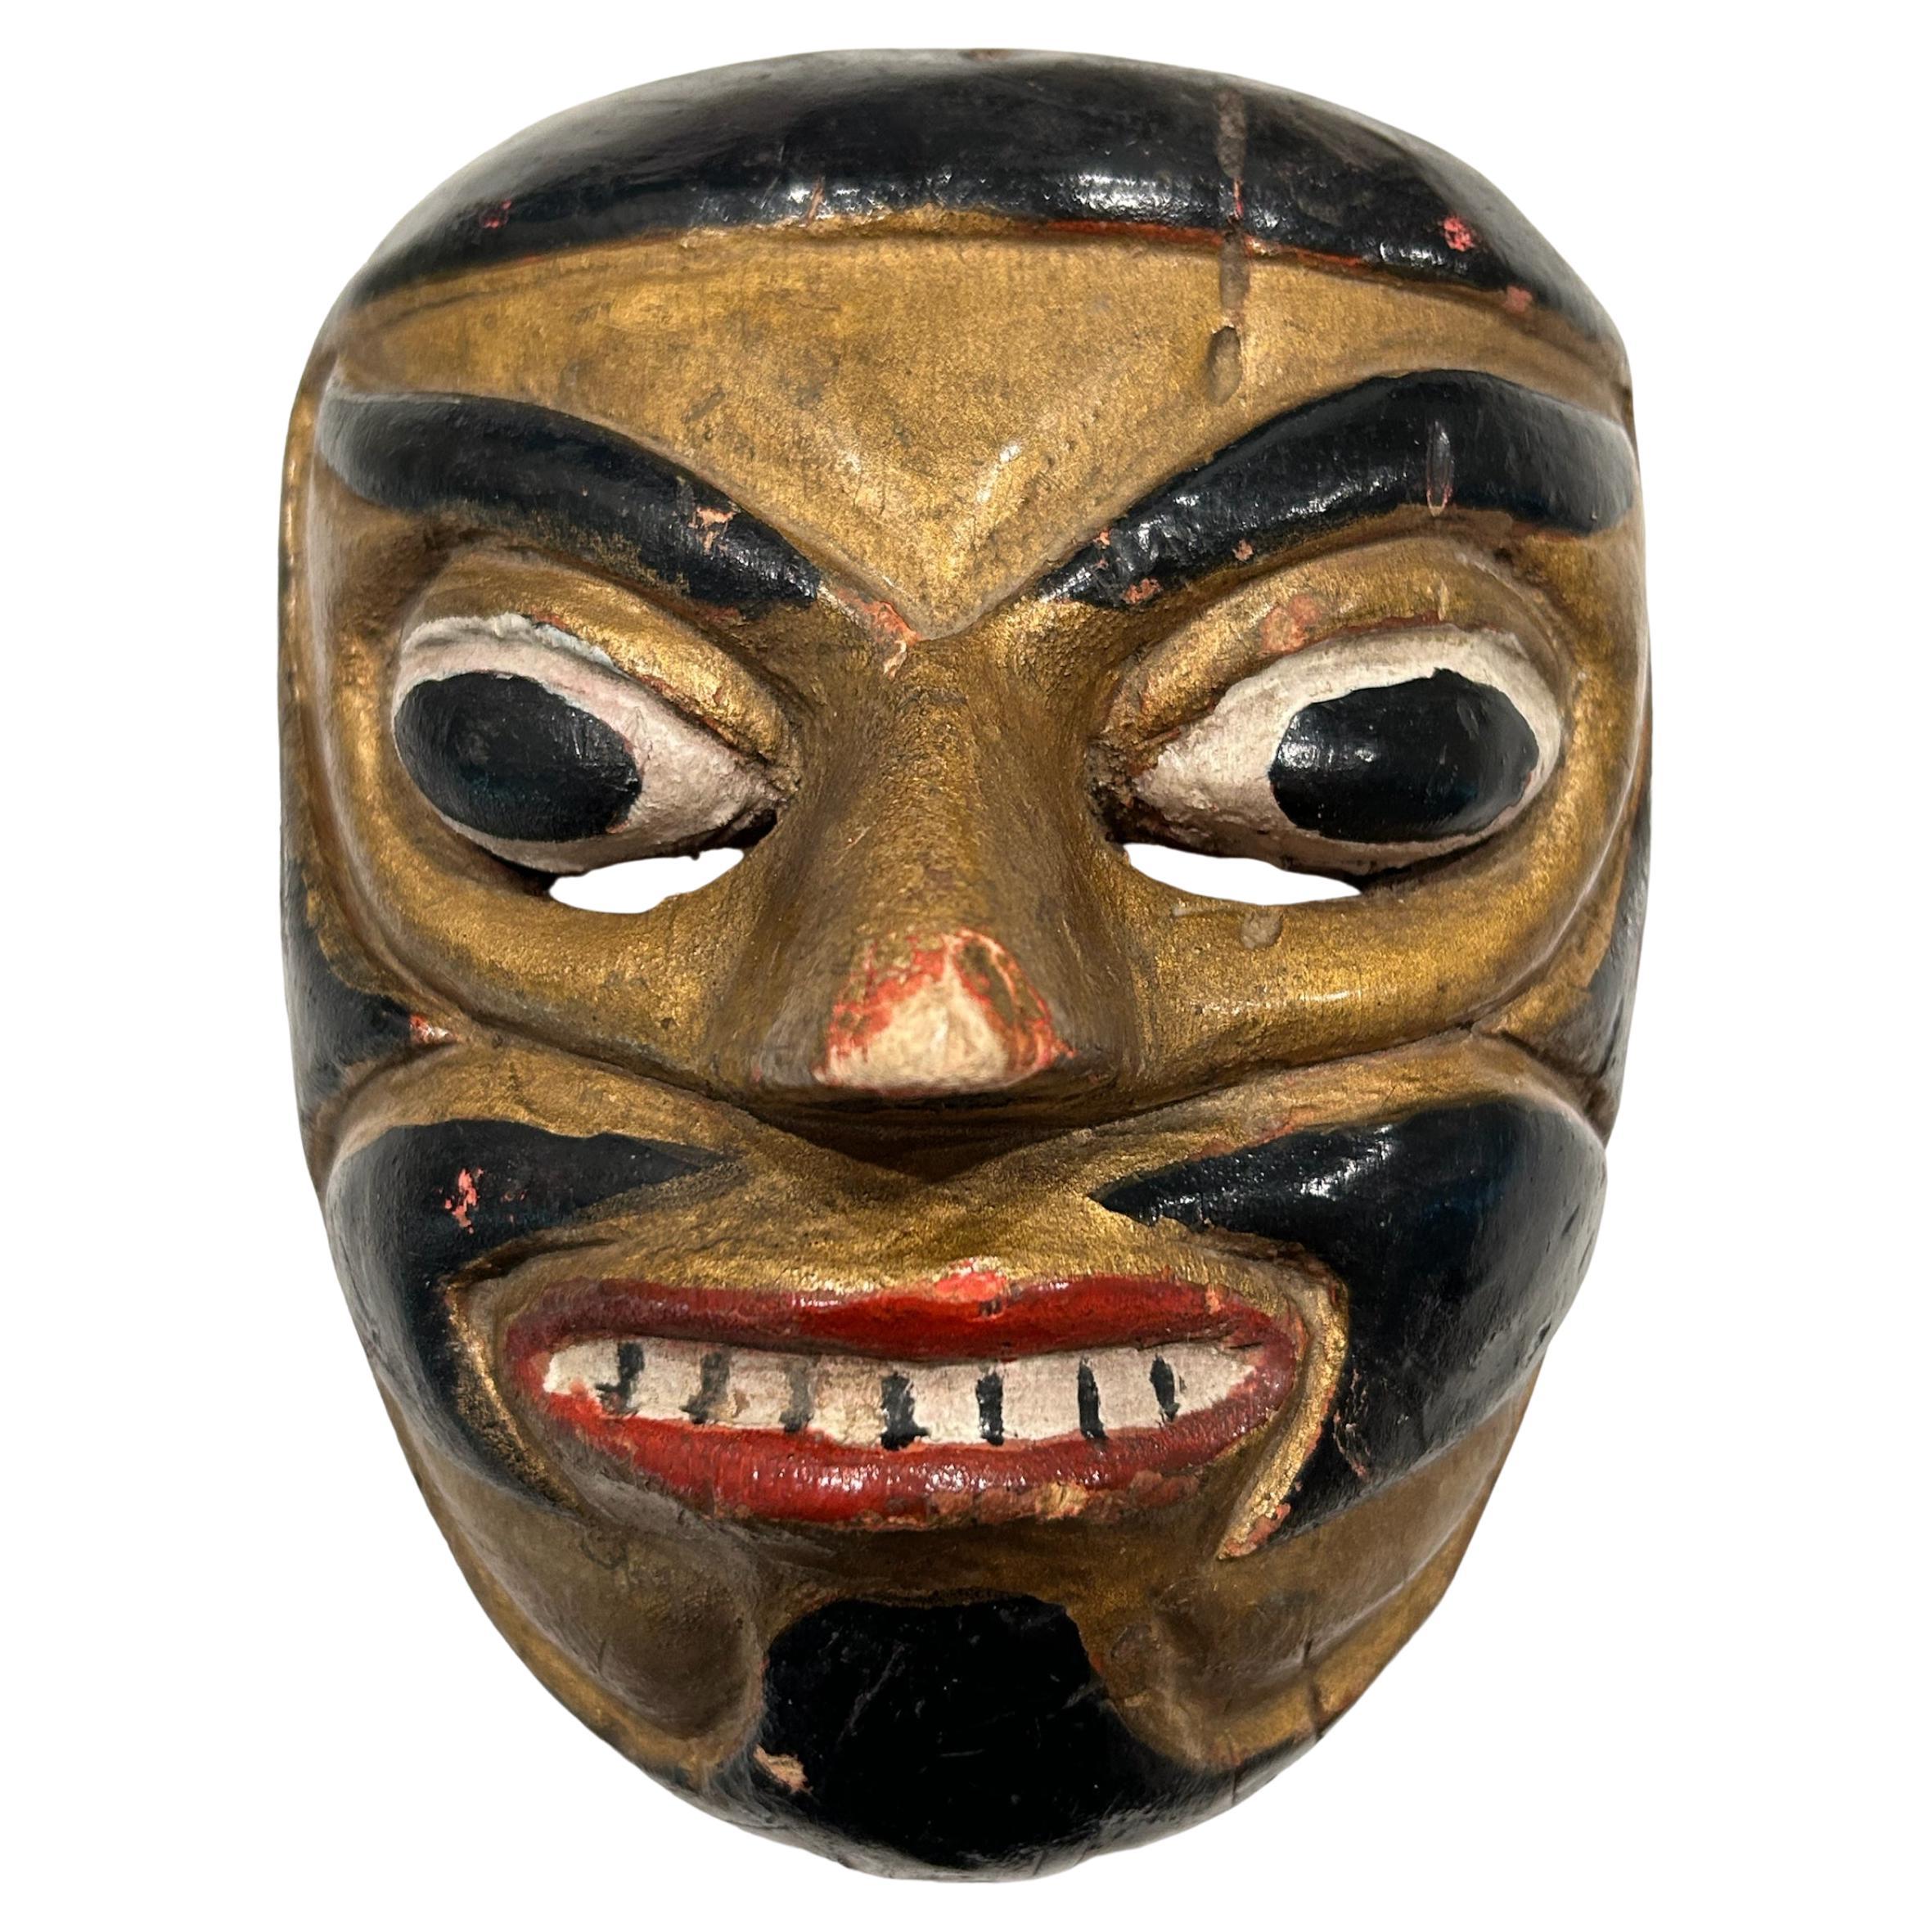 What are Bali masks called?